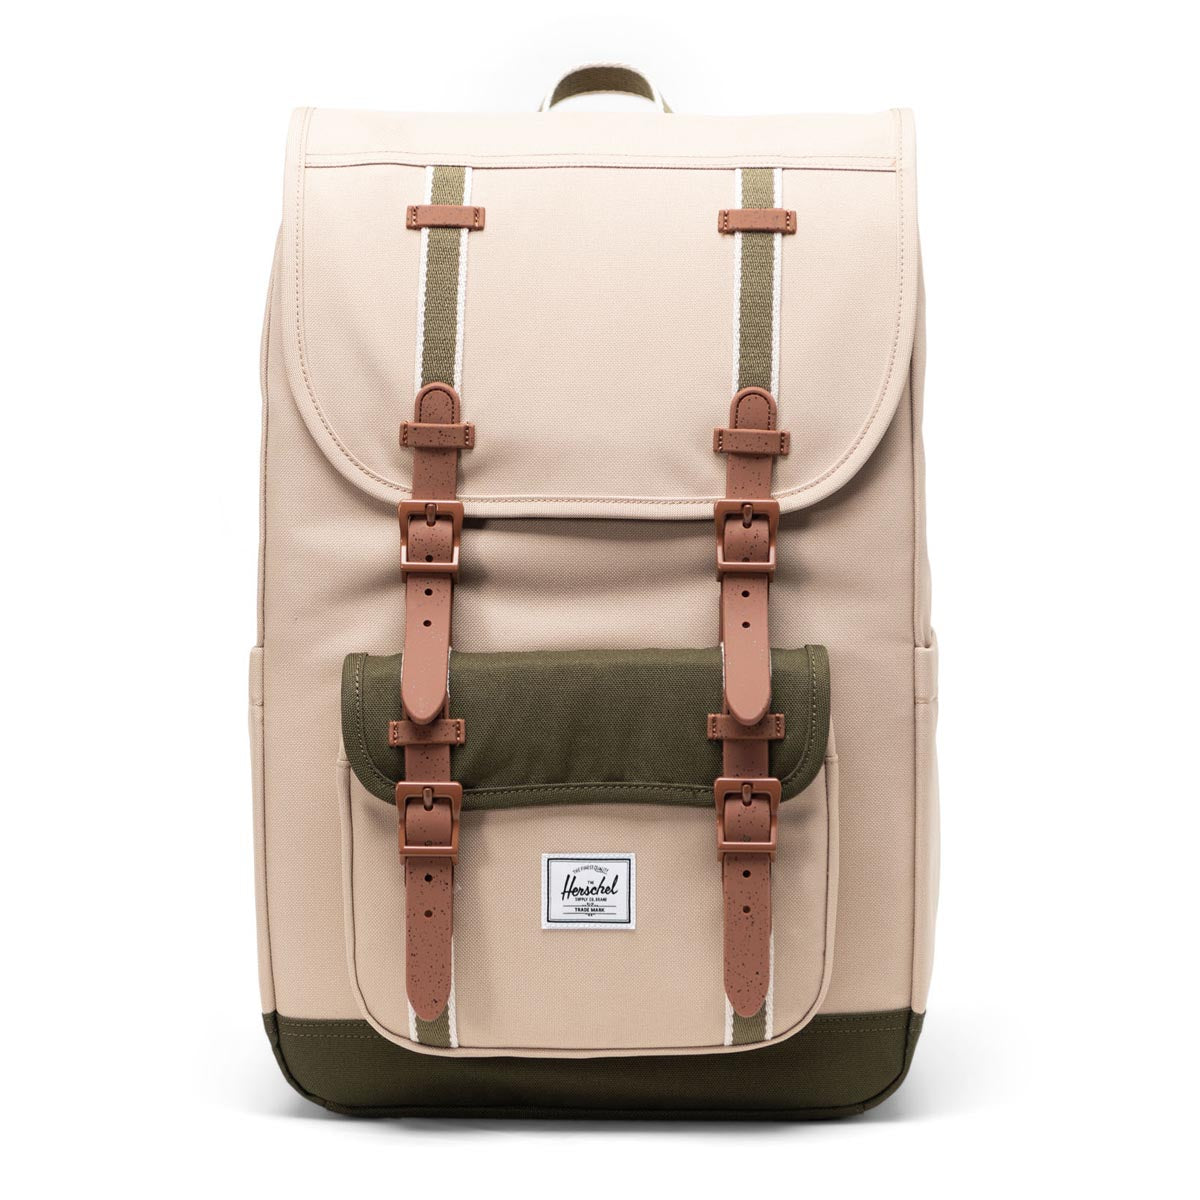 Herschel Supply Little America Mid Backpack - Twill/Ivy Green image 1